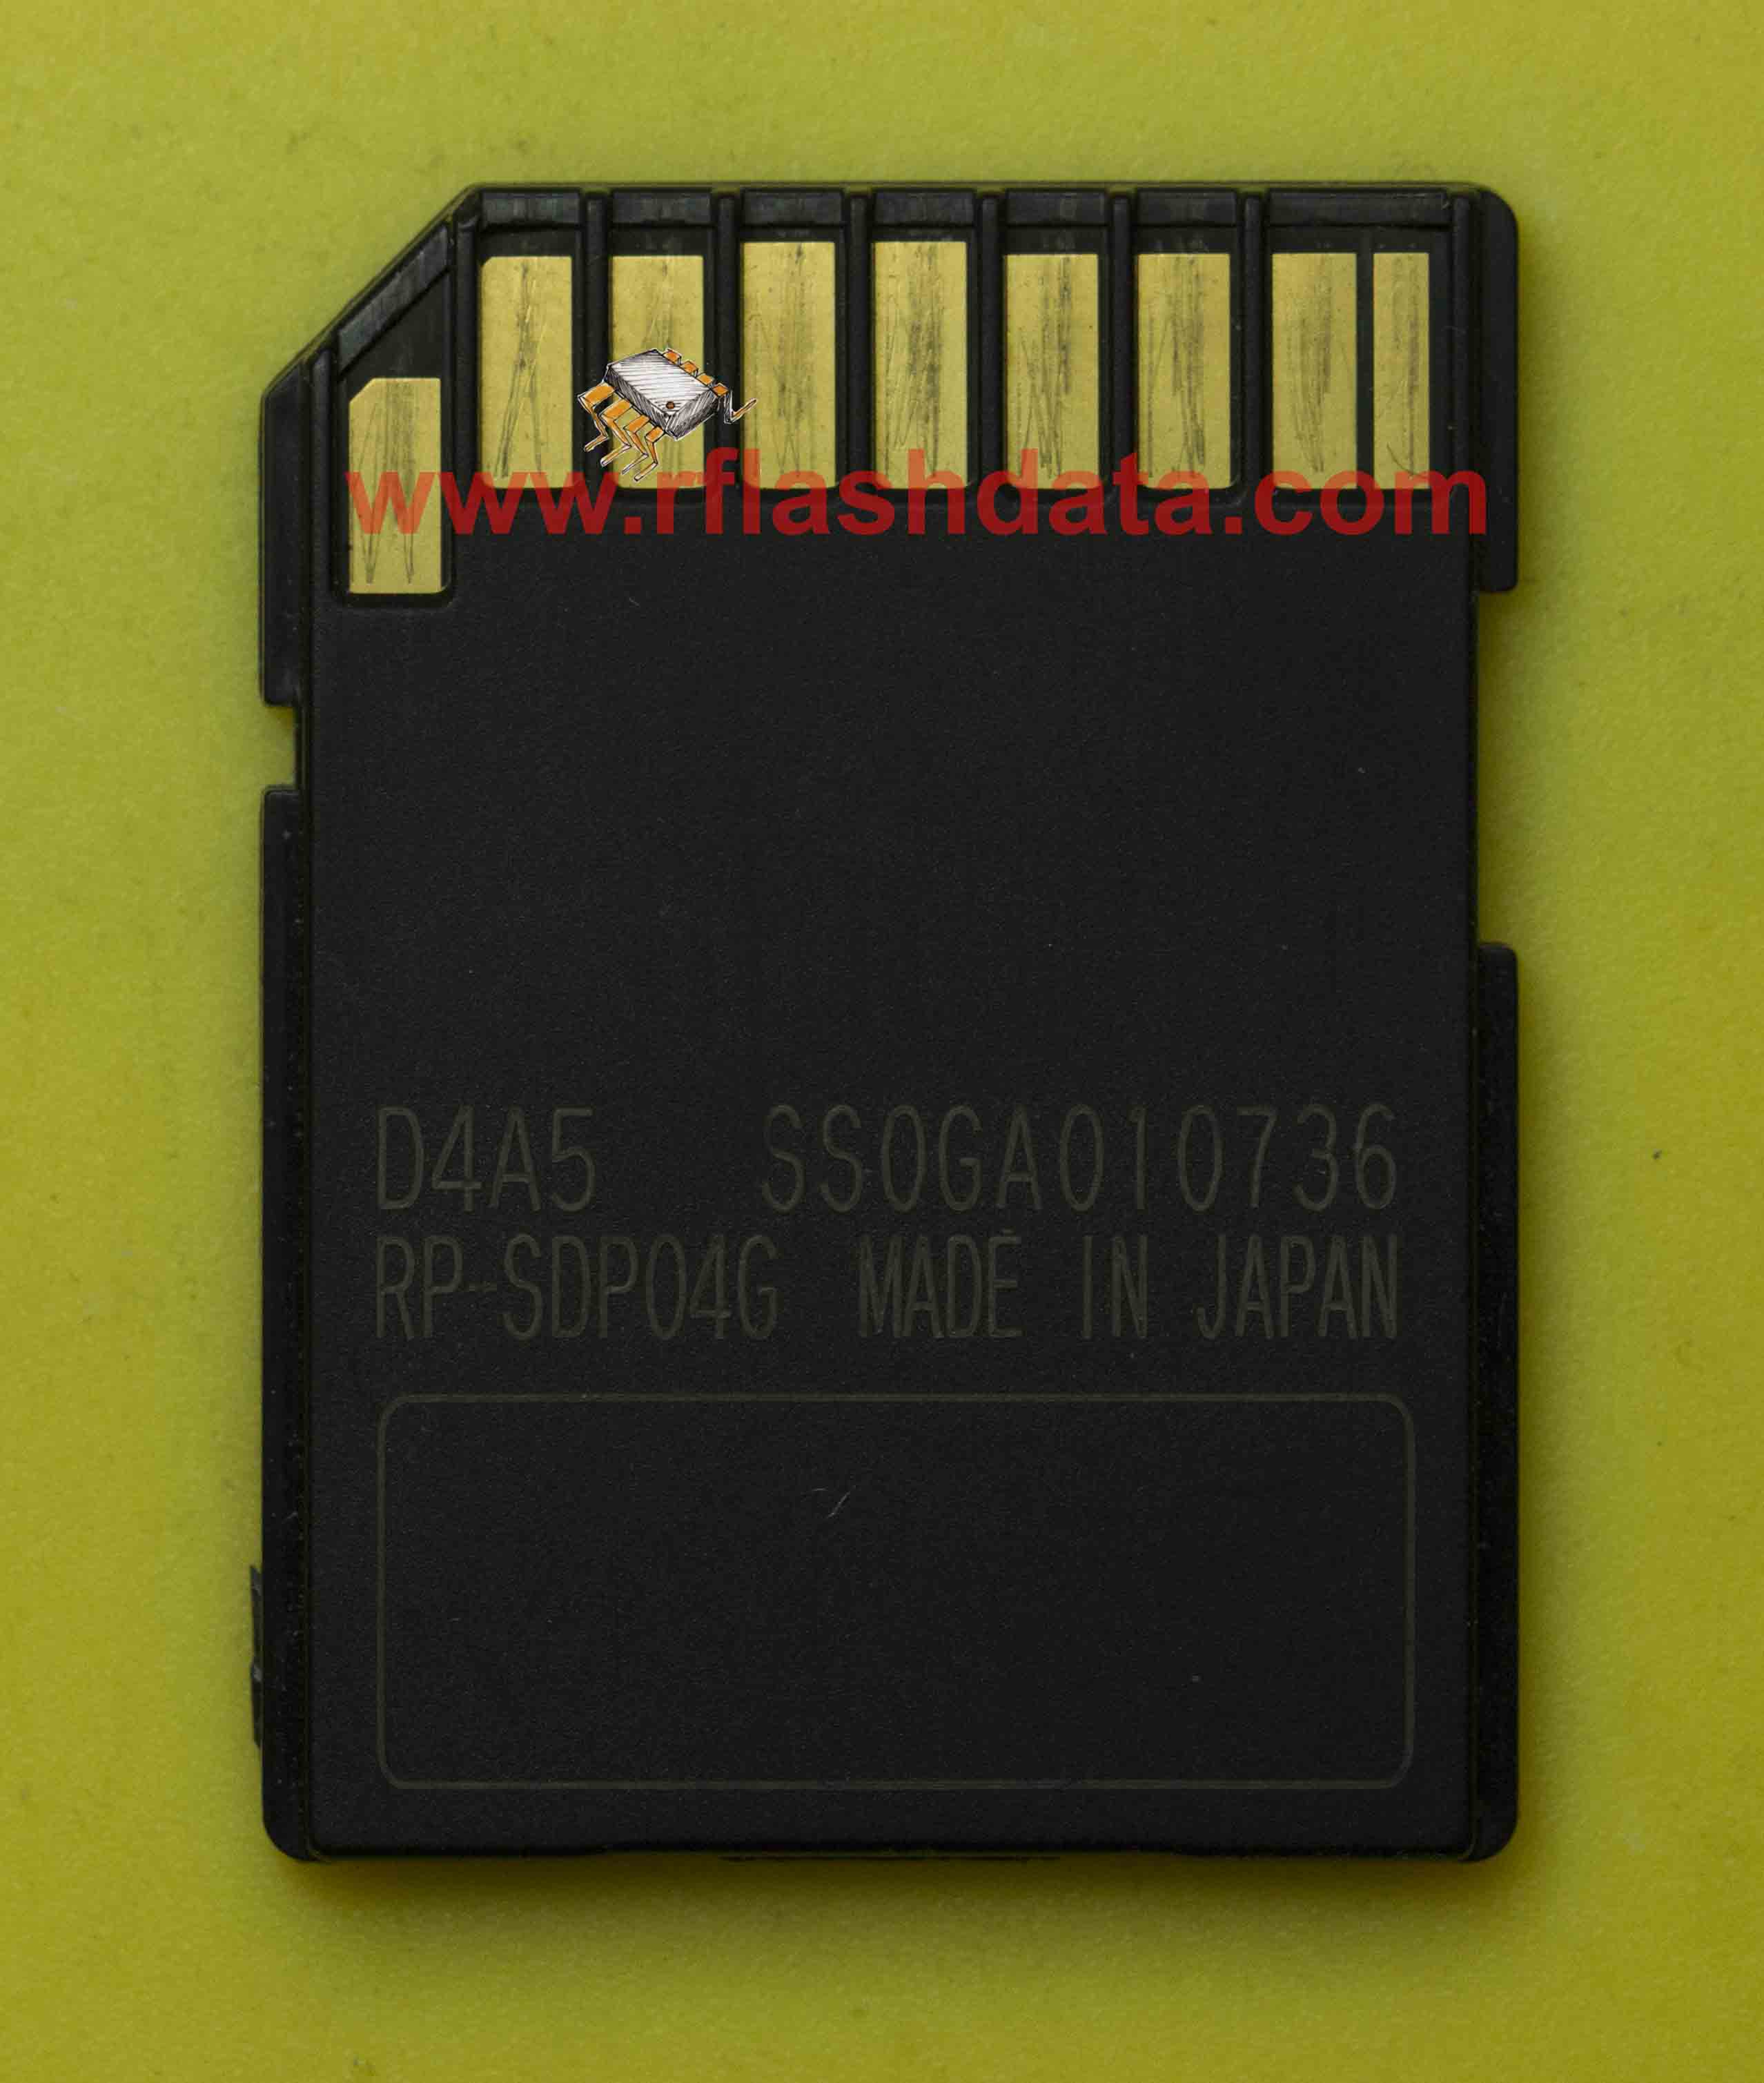 D4A5 SS0GA010736 RP-SDP04G MADE IN JAPAN